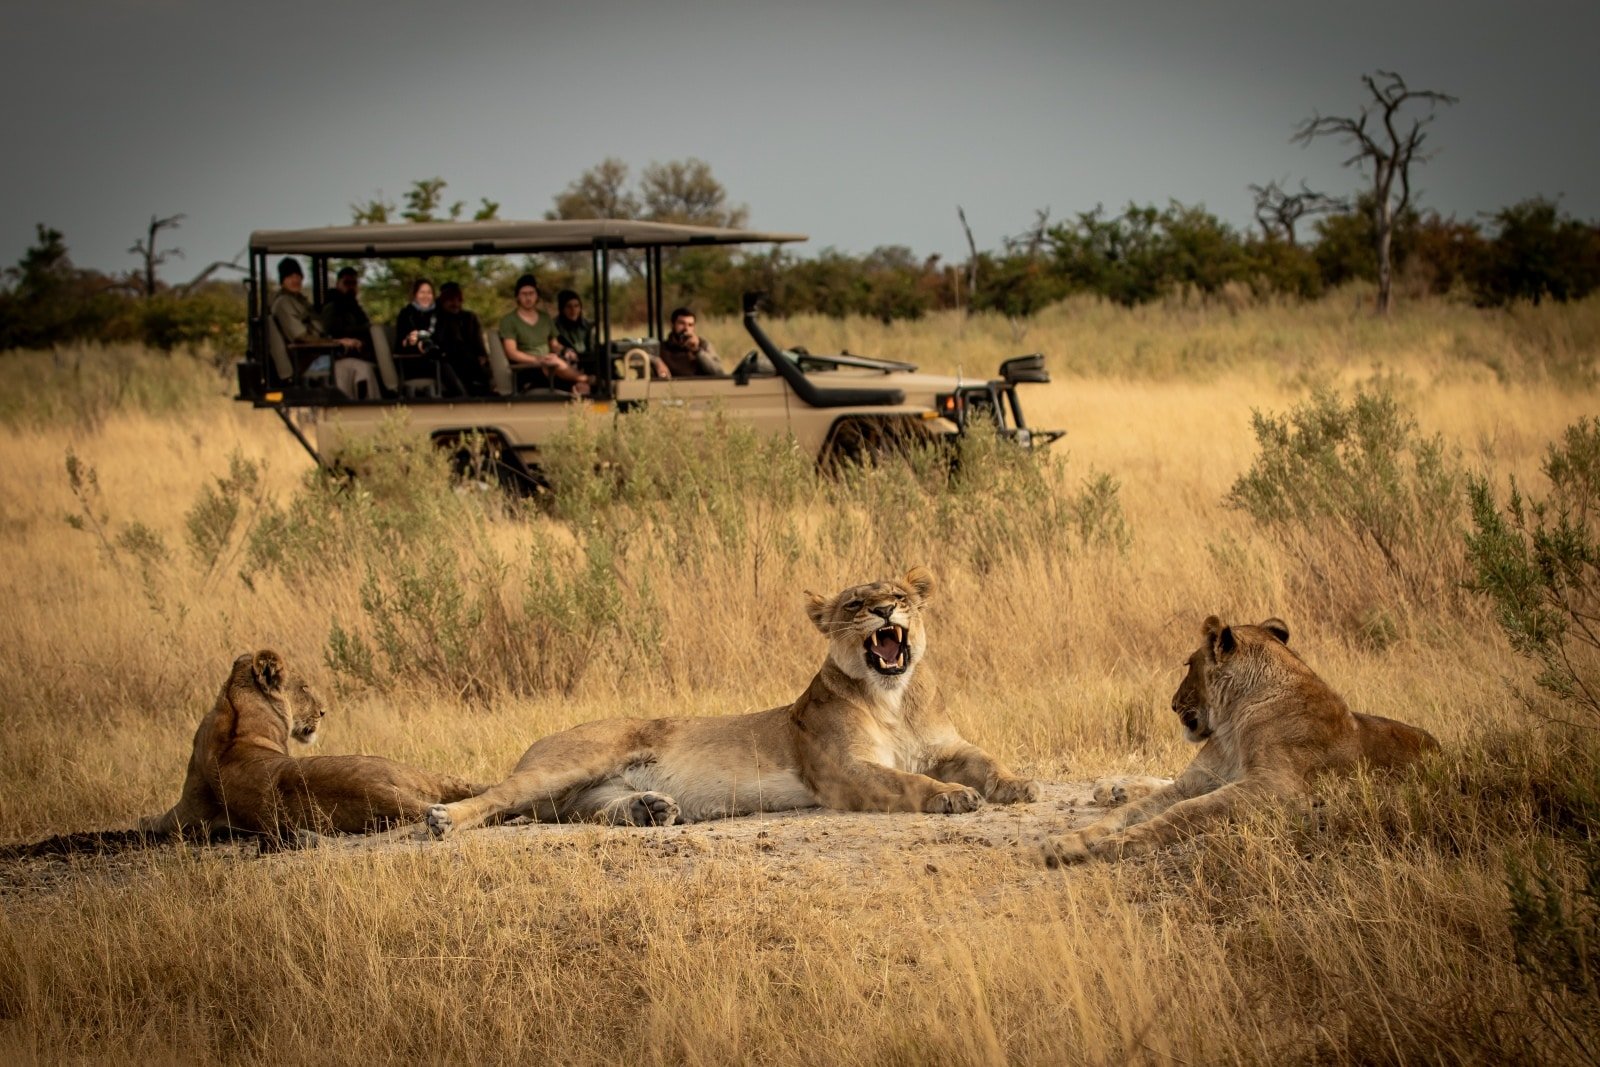 <p><span>Botswana’s approach to wildlife tourism involves local communities in conservation and tourism management. Projects like the Okavango Community Trust offer opportunities to engage in wildlife monitoring and sustainable tourism practices.</span></p> <p><span>Visitors can join guided wildlife safaris, bird-watching excursions, and cultural tours, all led by local community members. </span><span>This provides an authentic wildlife experience and ensures that tourism’s benefits are shared with the local communities, contributing to wildlife conservation and community development.</span></p> <p><b>Insider’s Tip: </b><span>Opt for accommodations and tours that are part of community trusts or conservancies.</span></p>